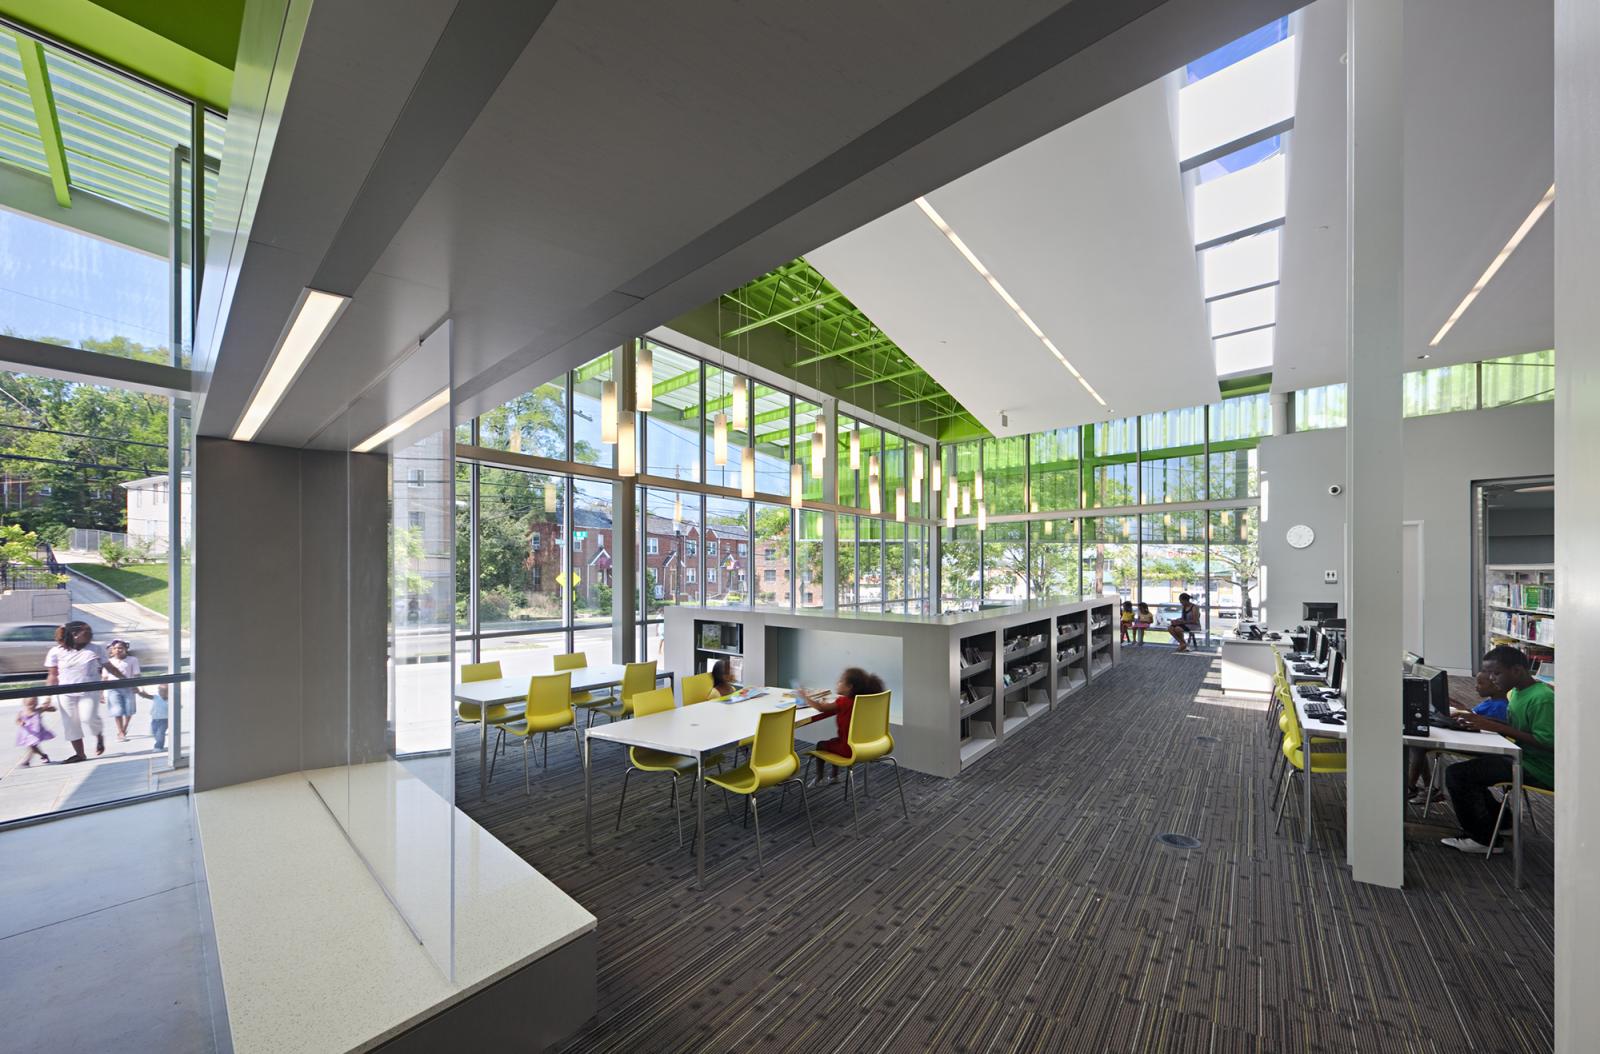 Anacostia Library, children's space.